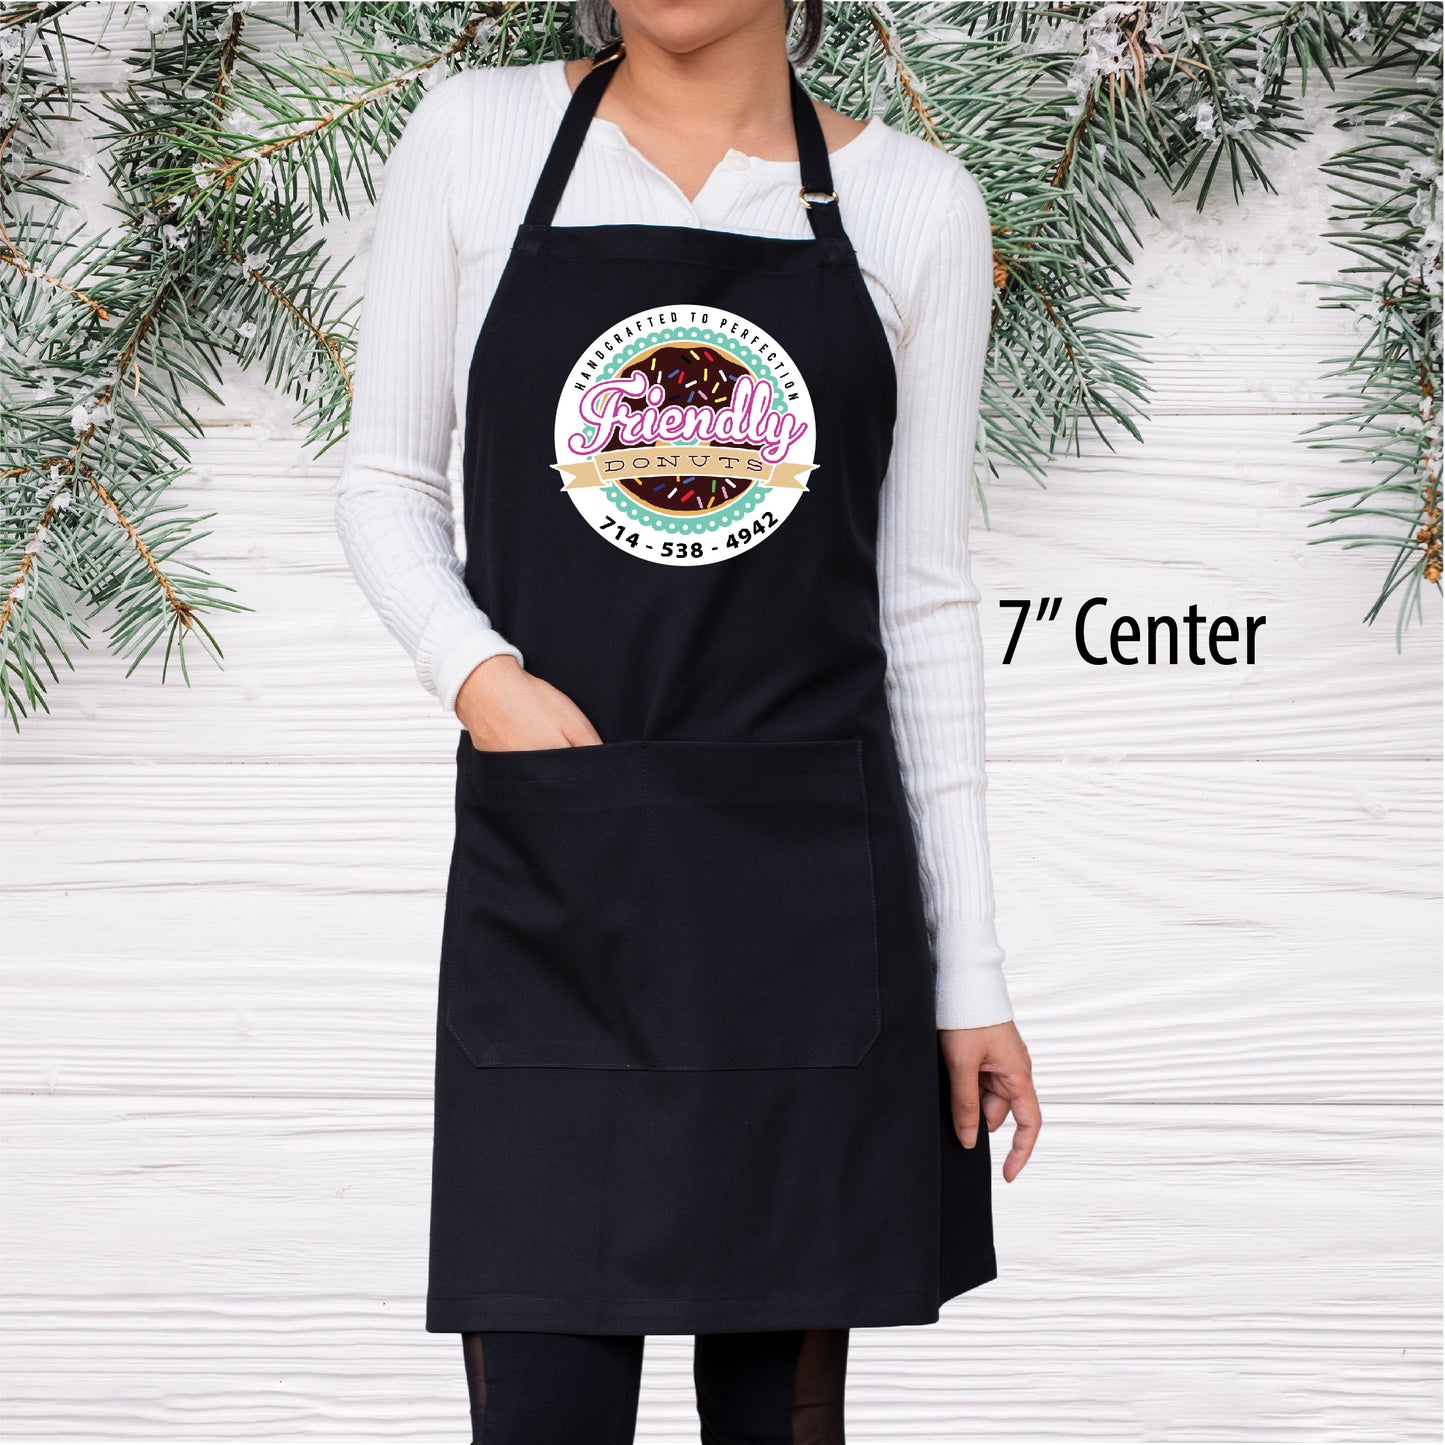 Personalized Apron for Women, Custom Womens Apron, Cooking Apron, Kitchen  Embroidered Apron, Personalized Gift for Mom 